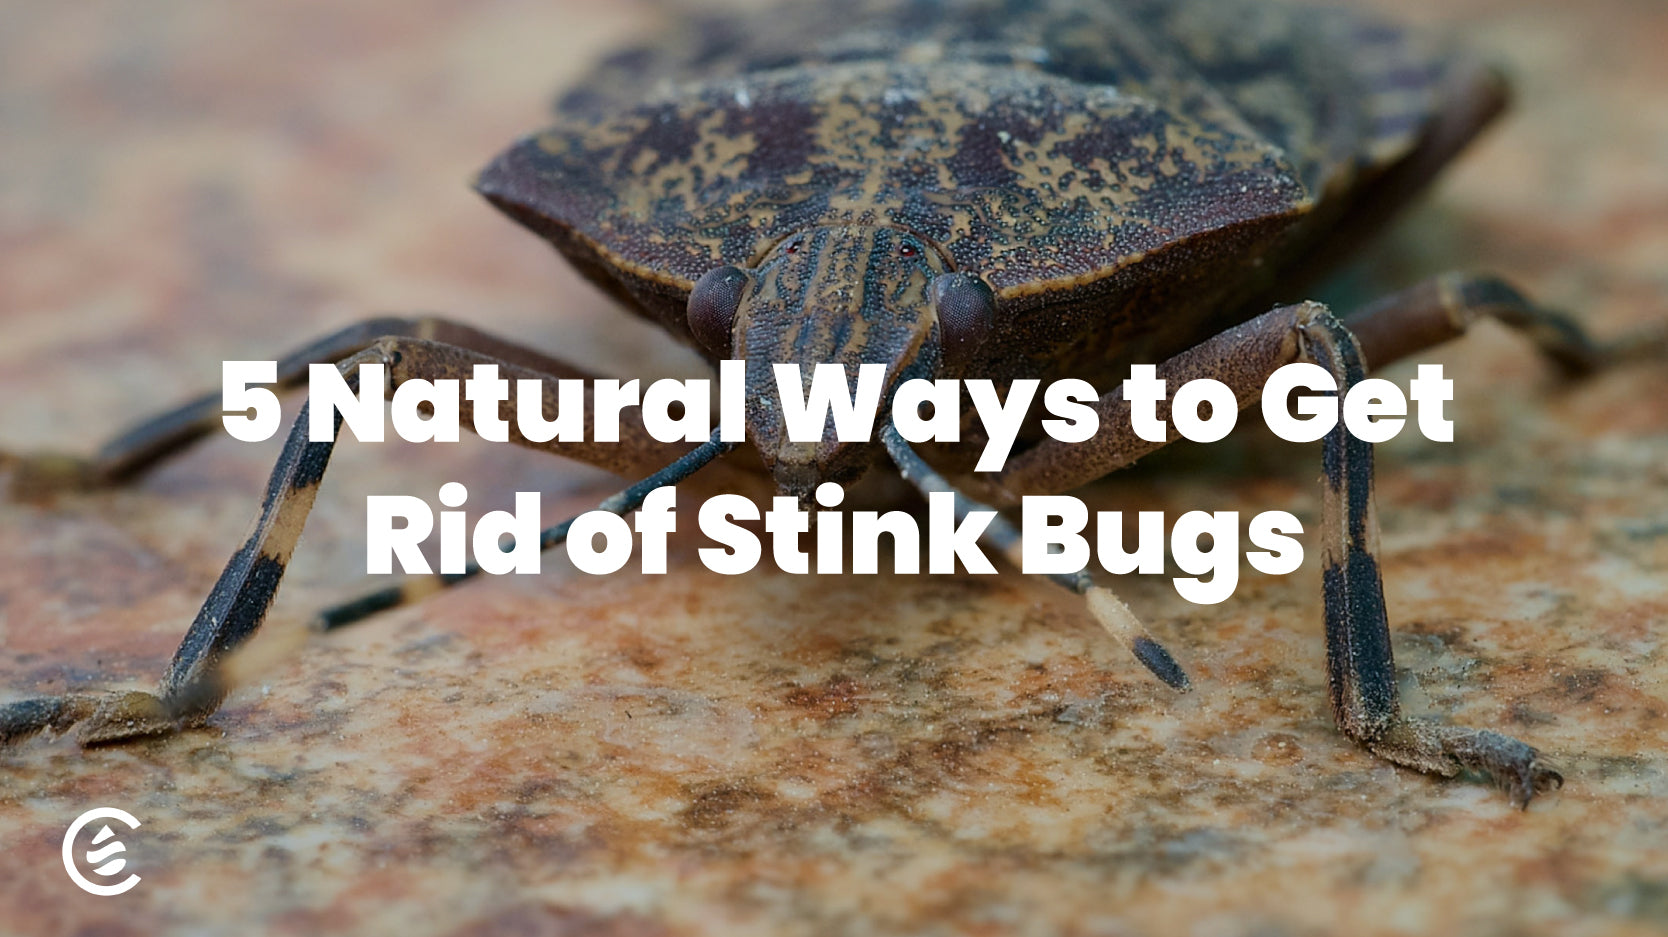 Cedarcide Blog Post Image, 5 Natural Ways to Get Rid of Stink Bugs